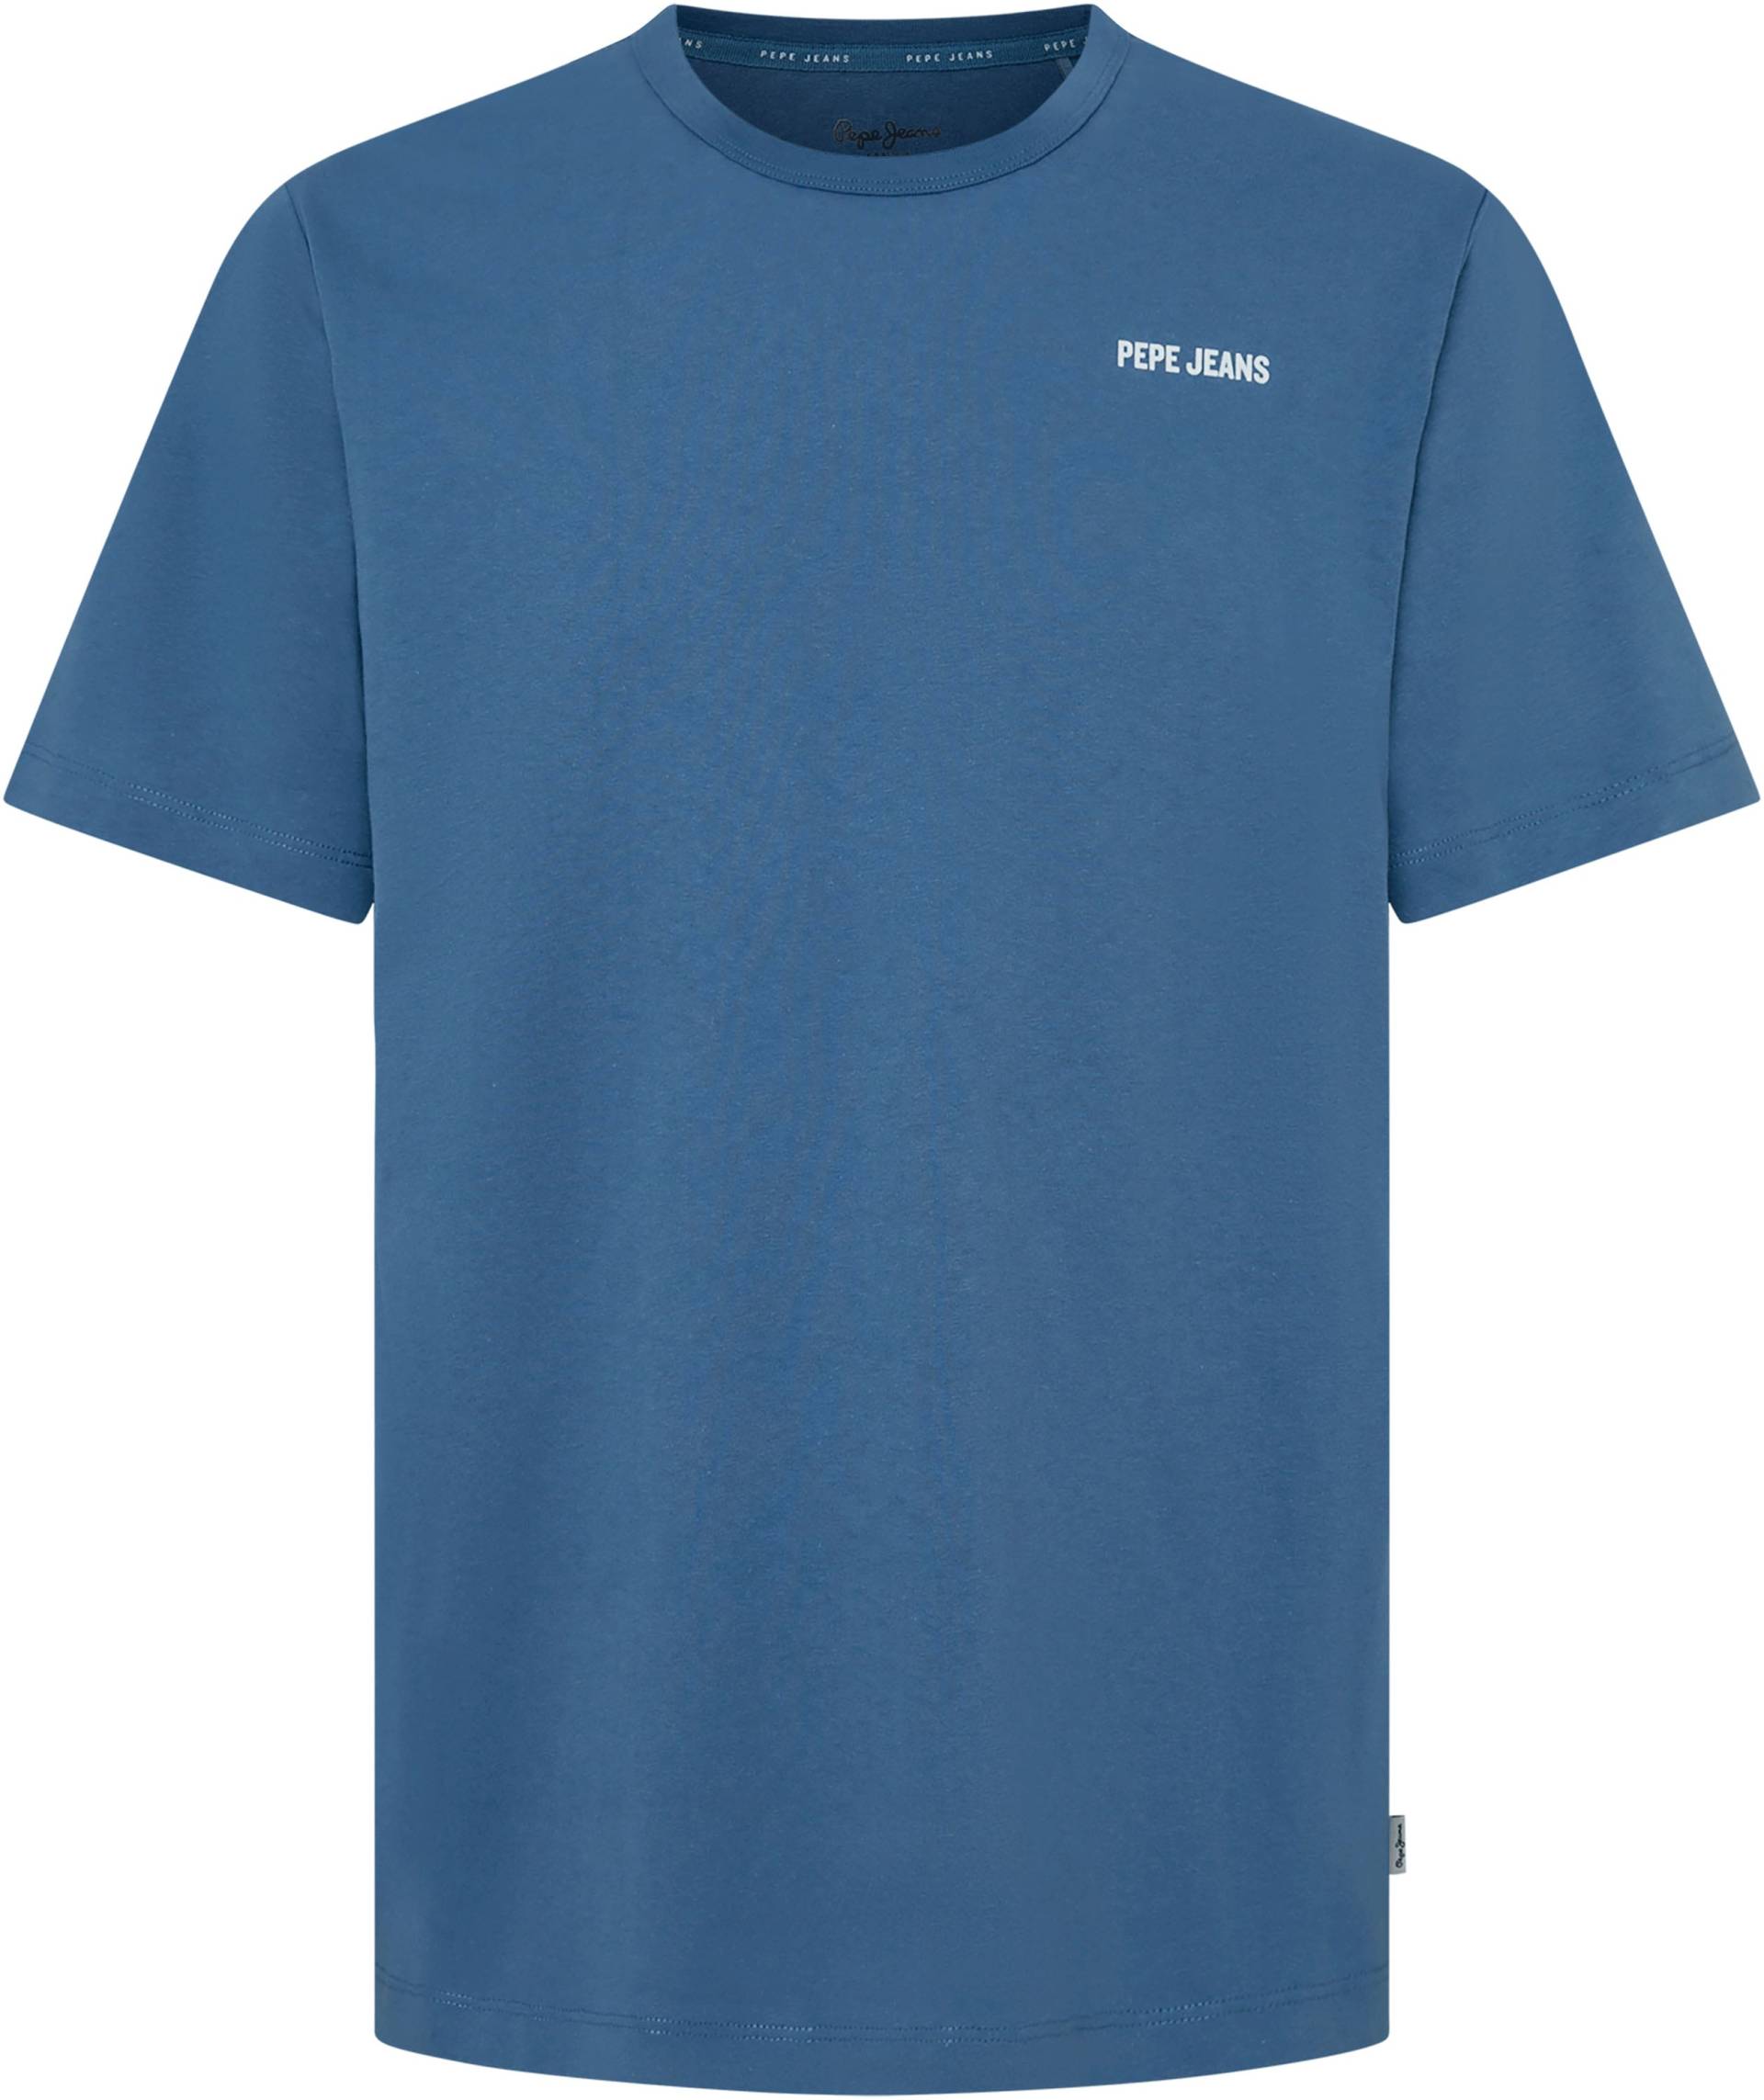 Pepe Jeans T-Shirt »AARON« von Pepe Jeans